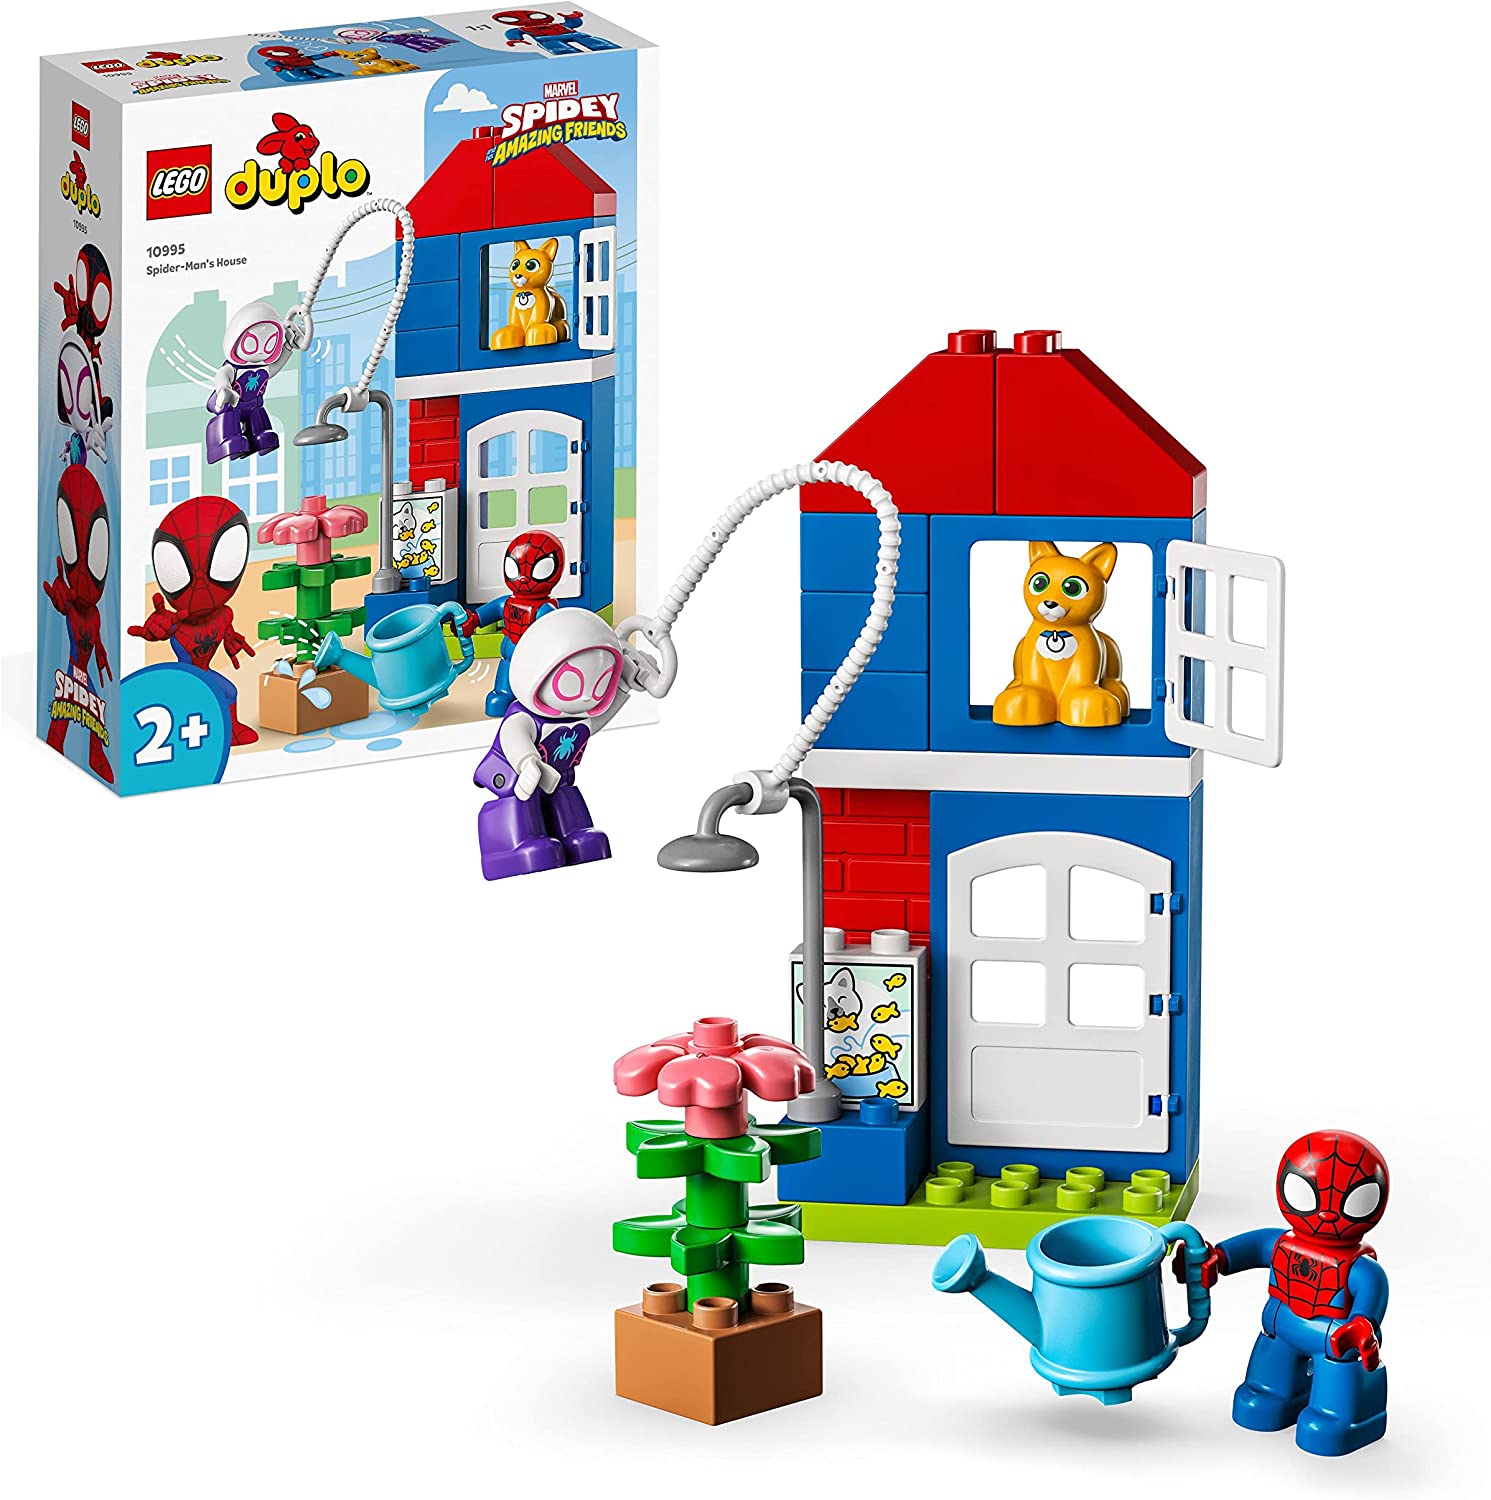 LEGO 10995 DUPLO Spider-Mans House, Spidey Set Toy for Building with Figure and Blocks for Toddlers from 2 Years, Spidey and His Super Friends